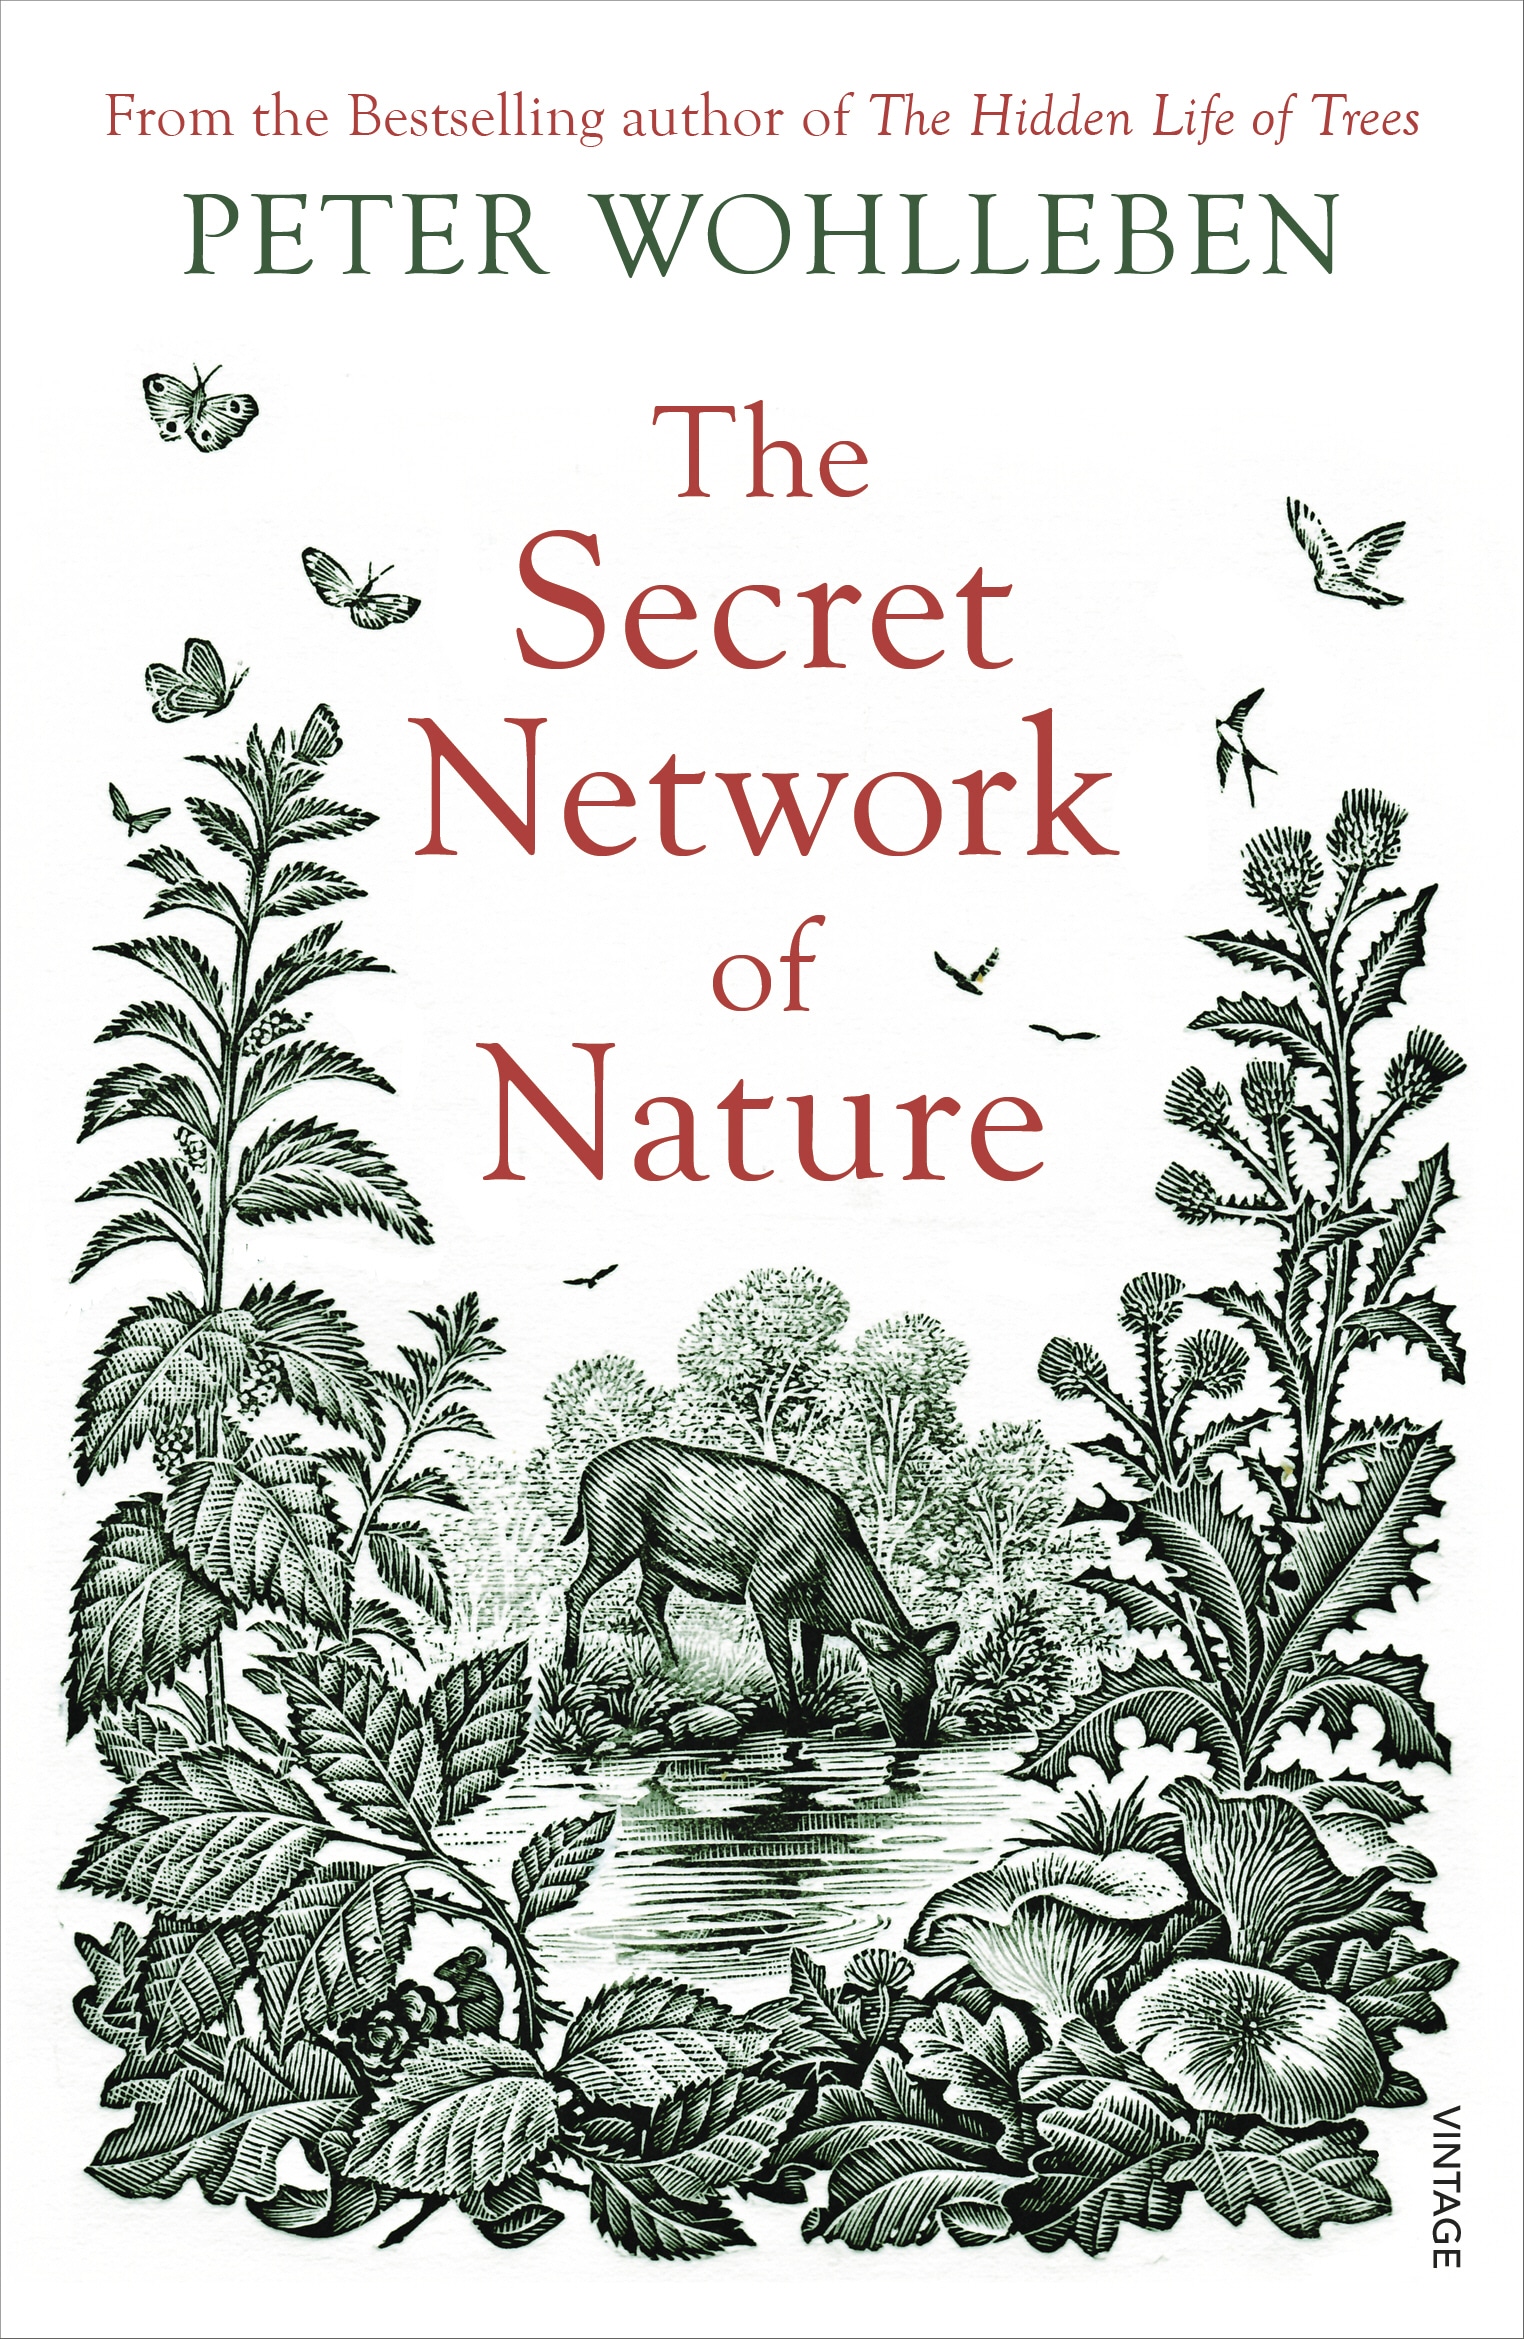 Book “The Secret Network of Nature” by Peter Wohlleben — September 5, 2019